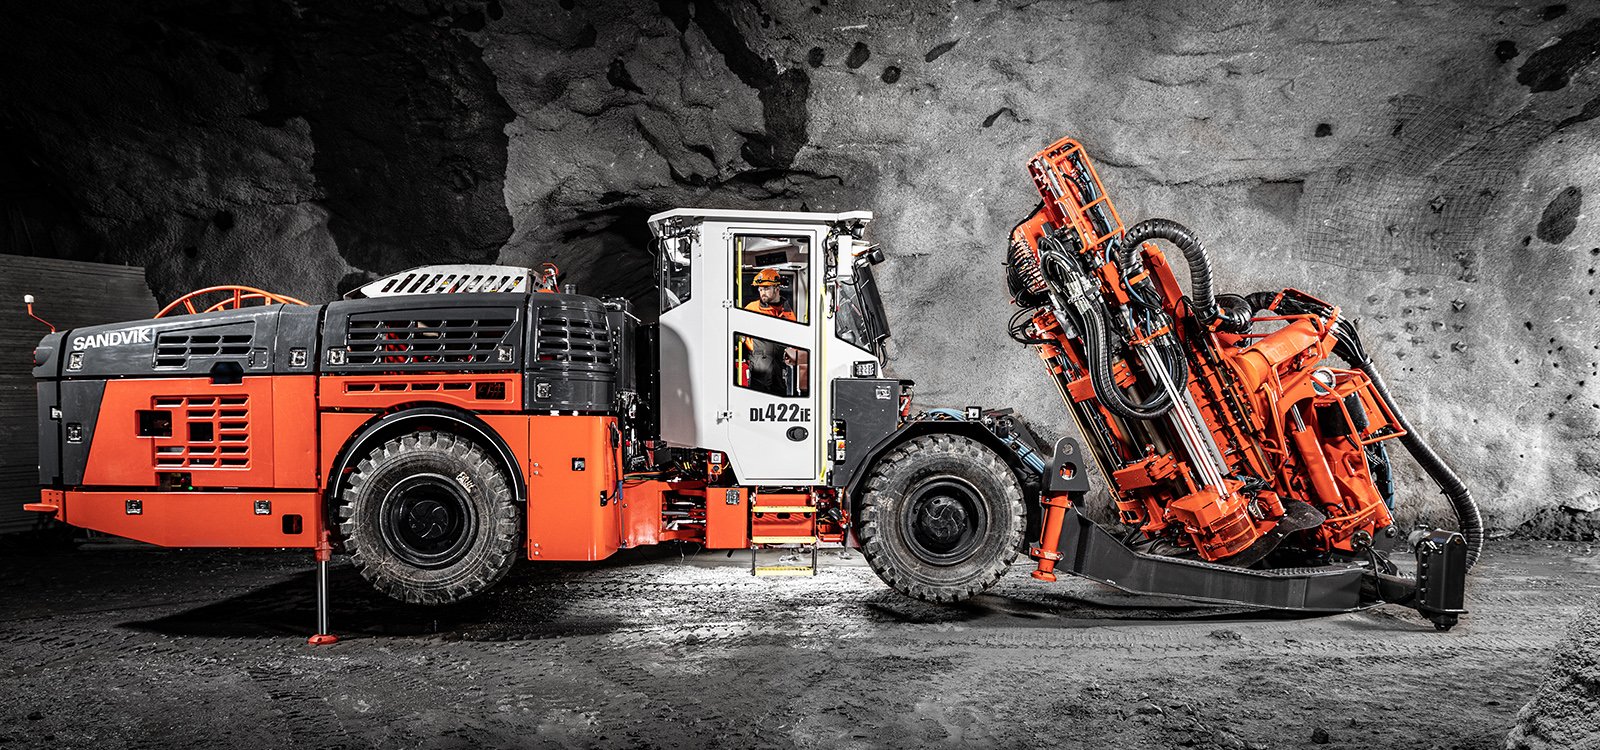 Providing a strong and evolving automation package, Sandvik DL422iE delivers efficient, emissionless production drilling.